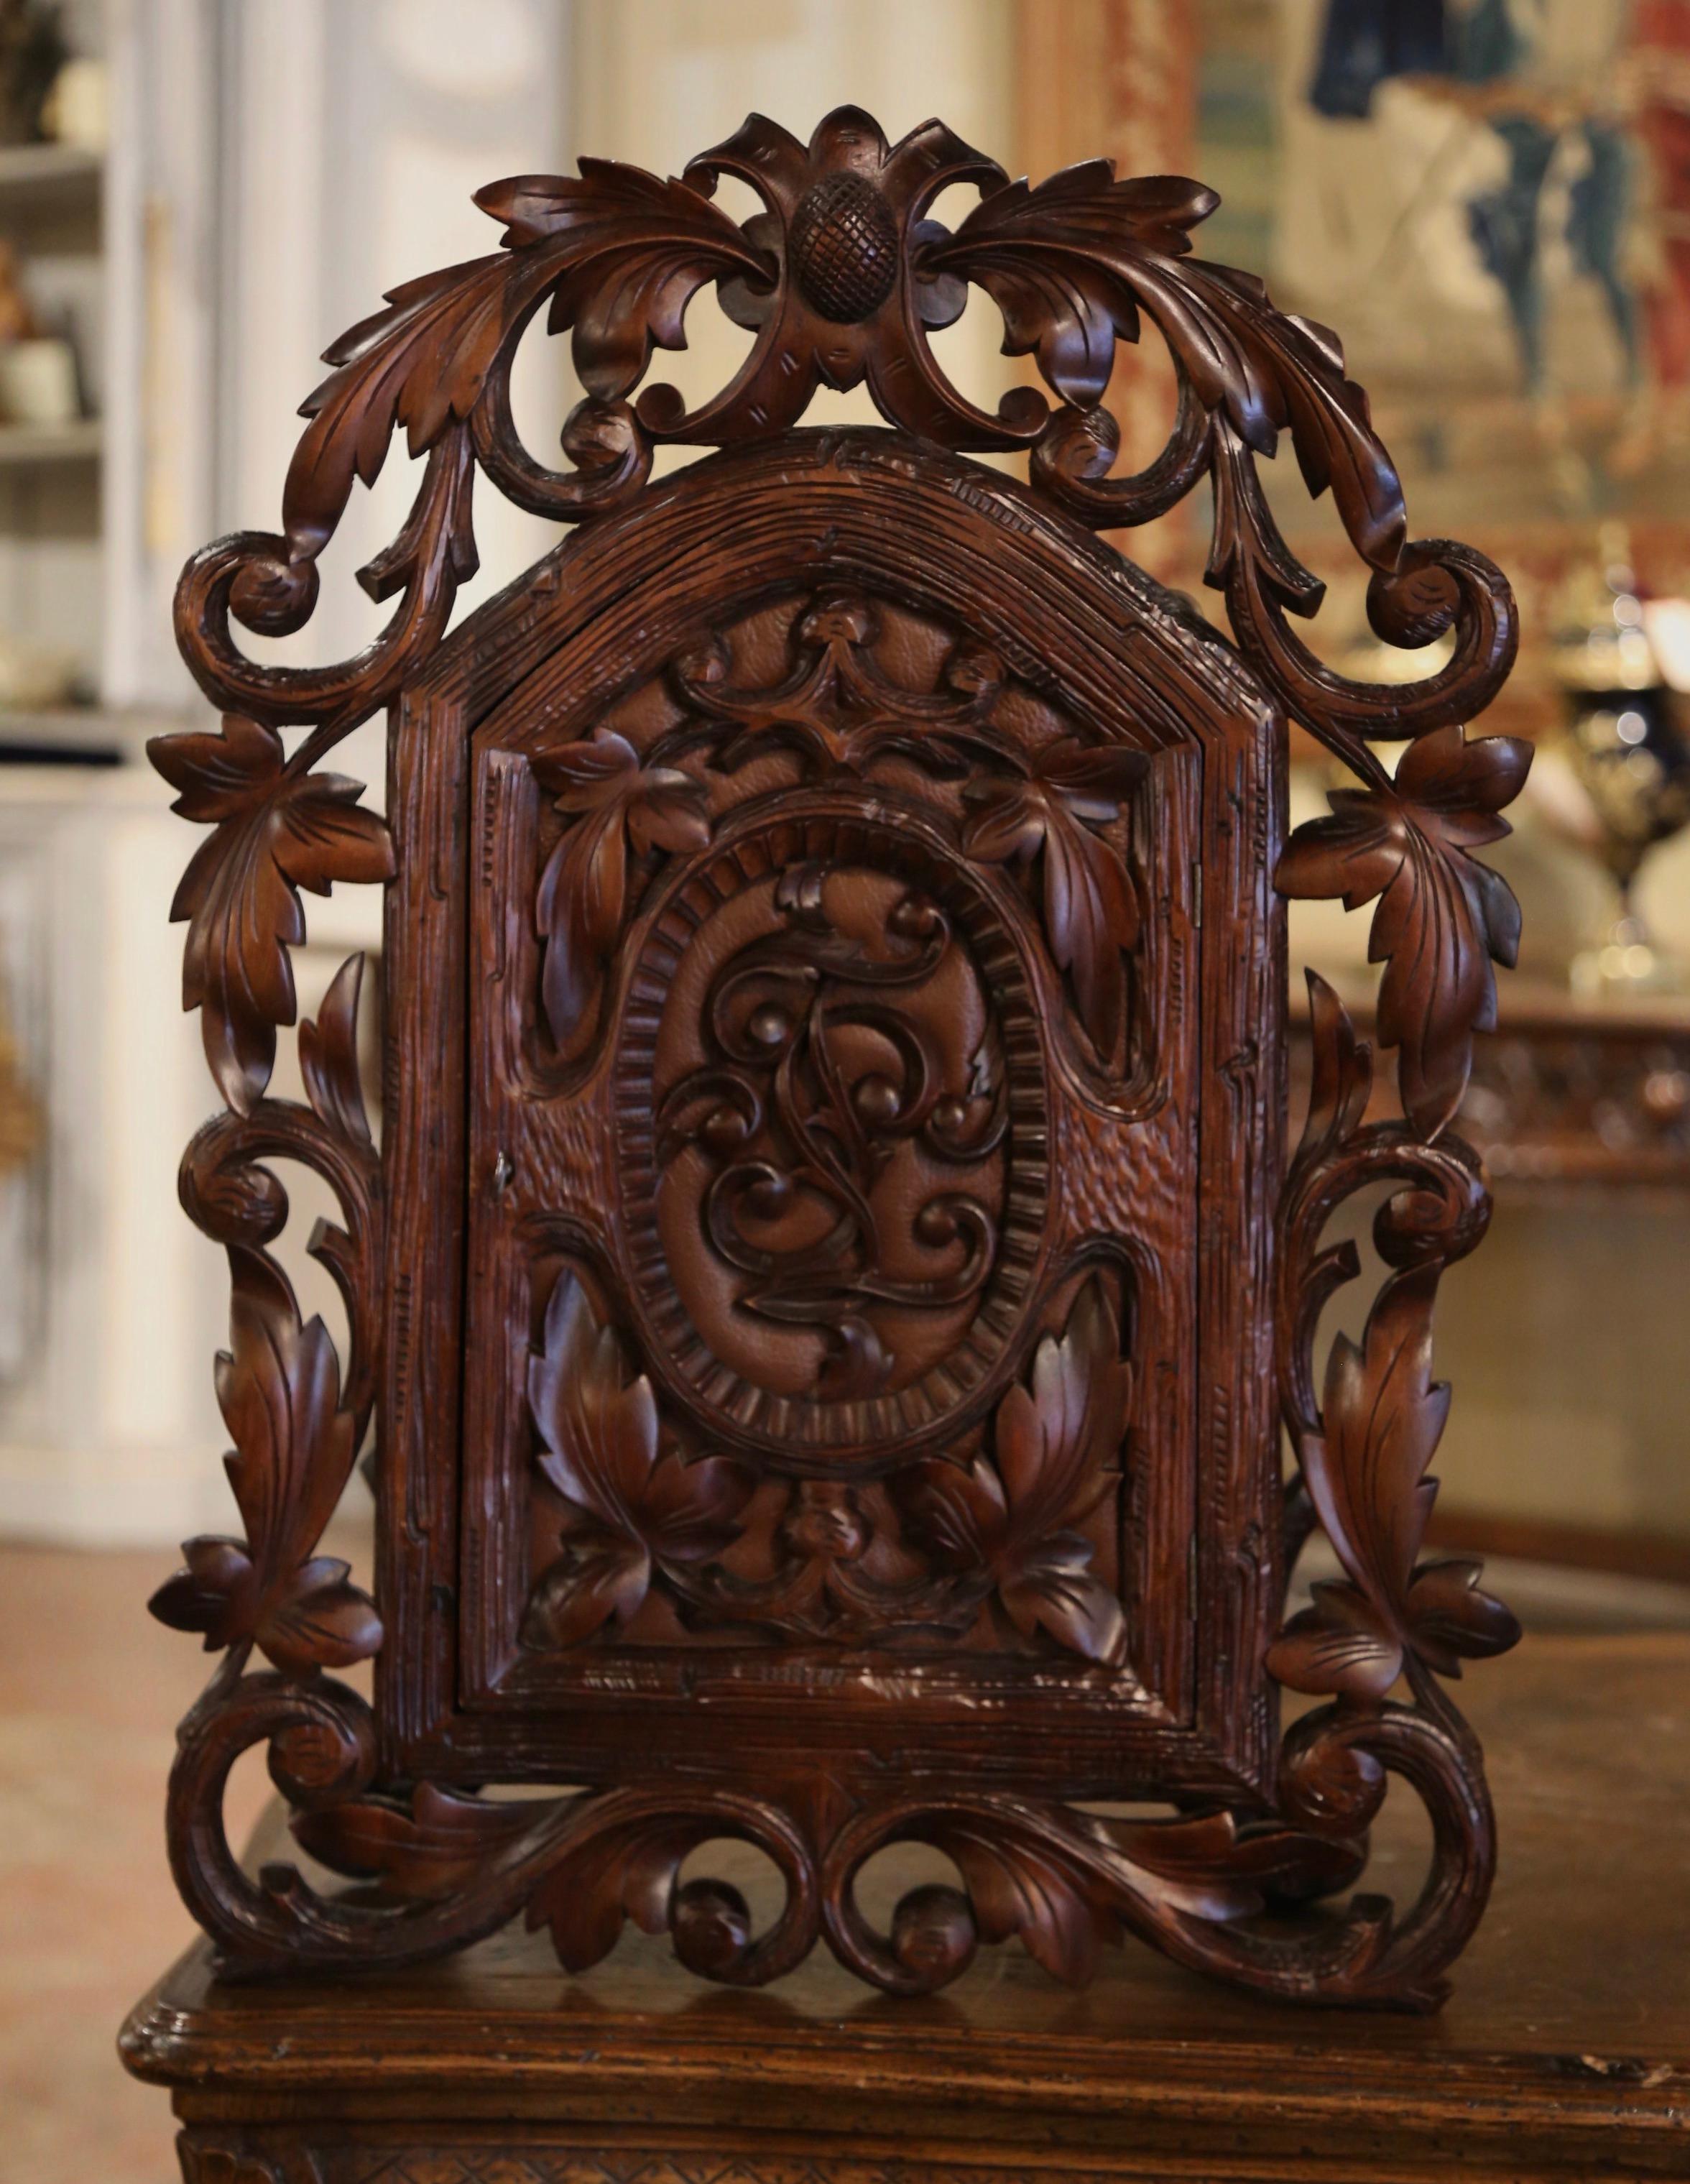 This elegant and heavily carved antique vitrine was crafted in France, circa 1880. The hanging cabinet features hand carved leaf and branch motifs throughout the front. The cabinet door with arched decor is dressed with an inset leather upholstery